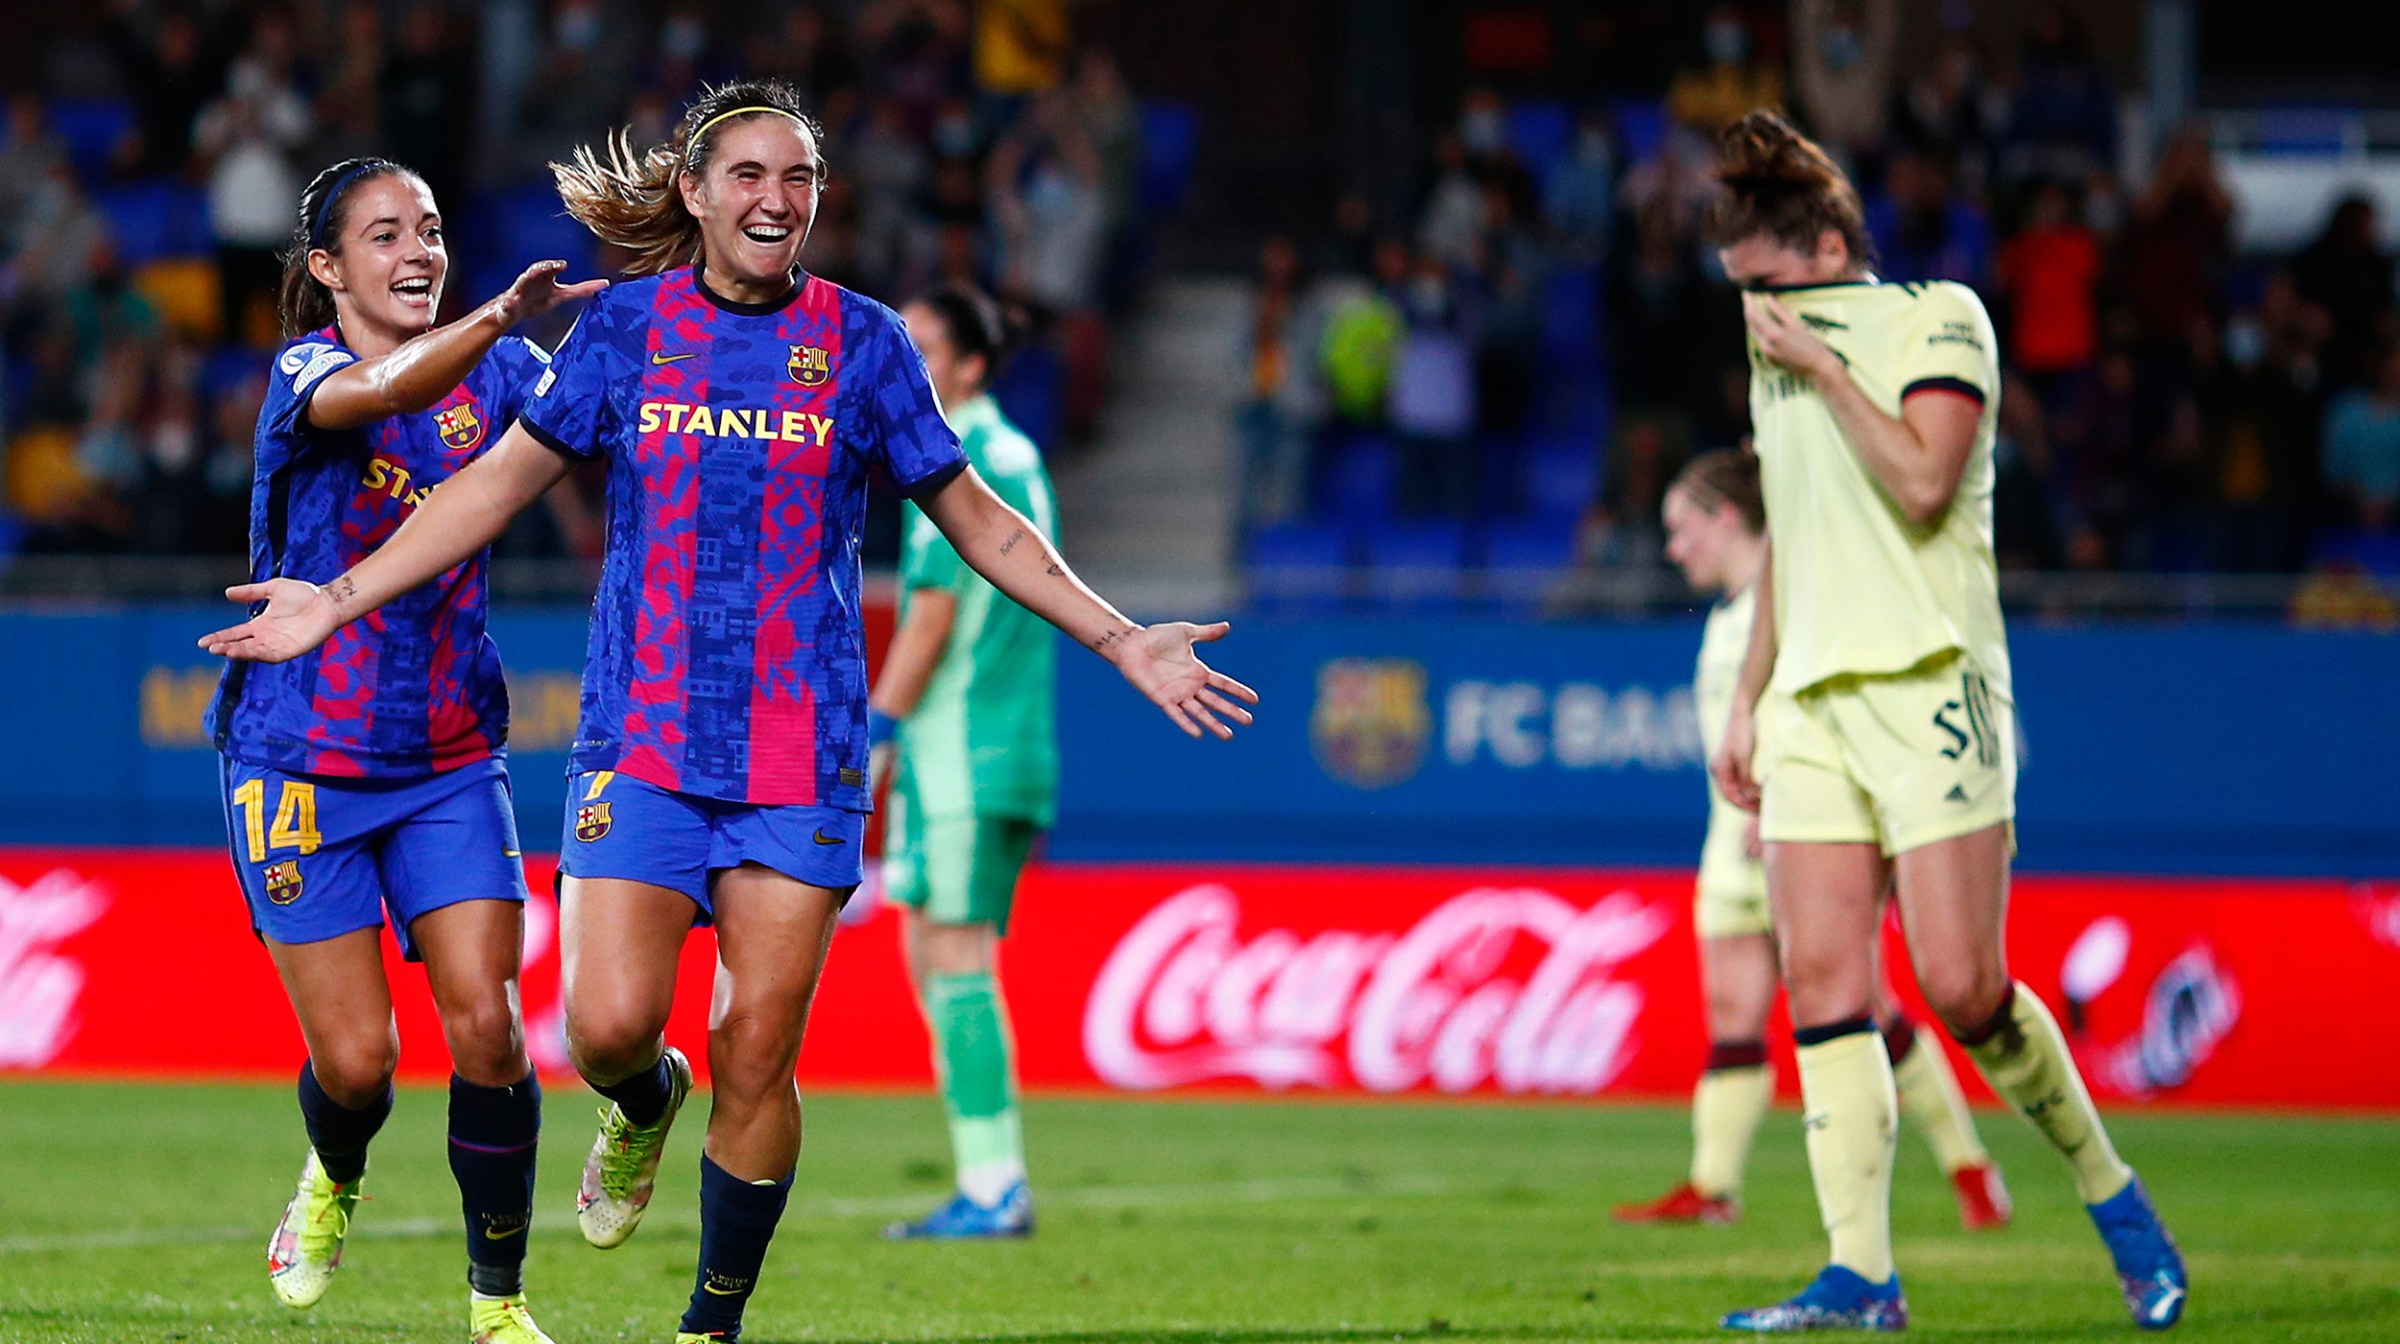 Mariona Caldentey of FC Barcelona celebrates scoring the opening goal during the UEFA Women's Champions League group C match between FC Barcelona and Arsenal WFC at Estadi Johan Cruyff on October 05, 2021 in Barcelona, Spain.